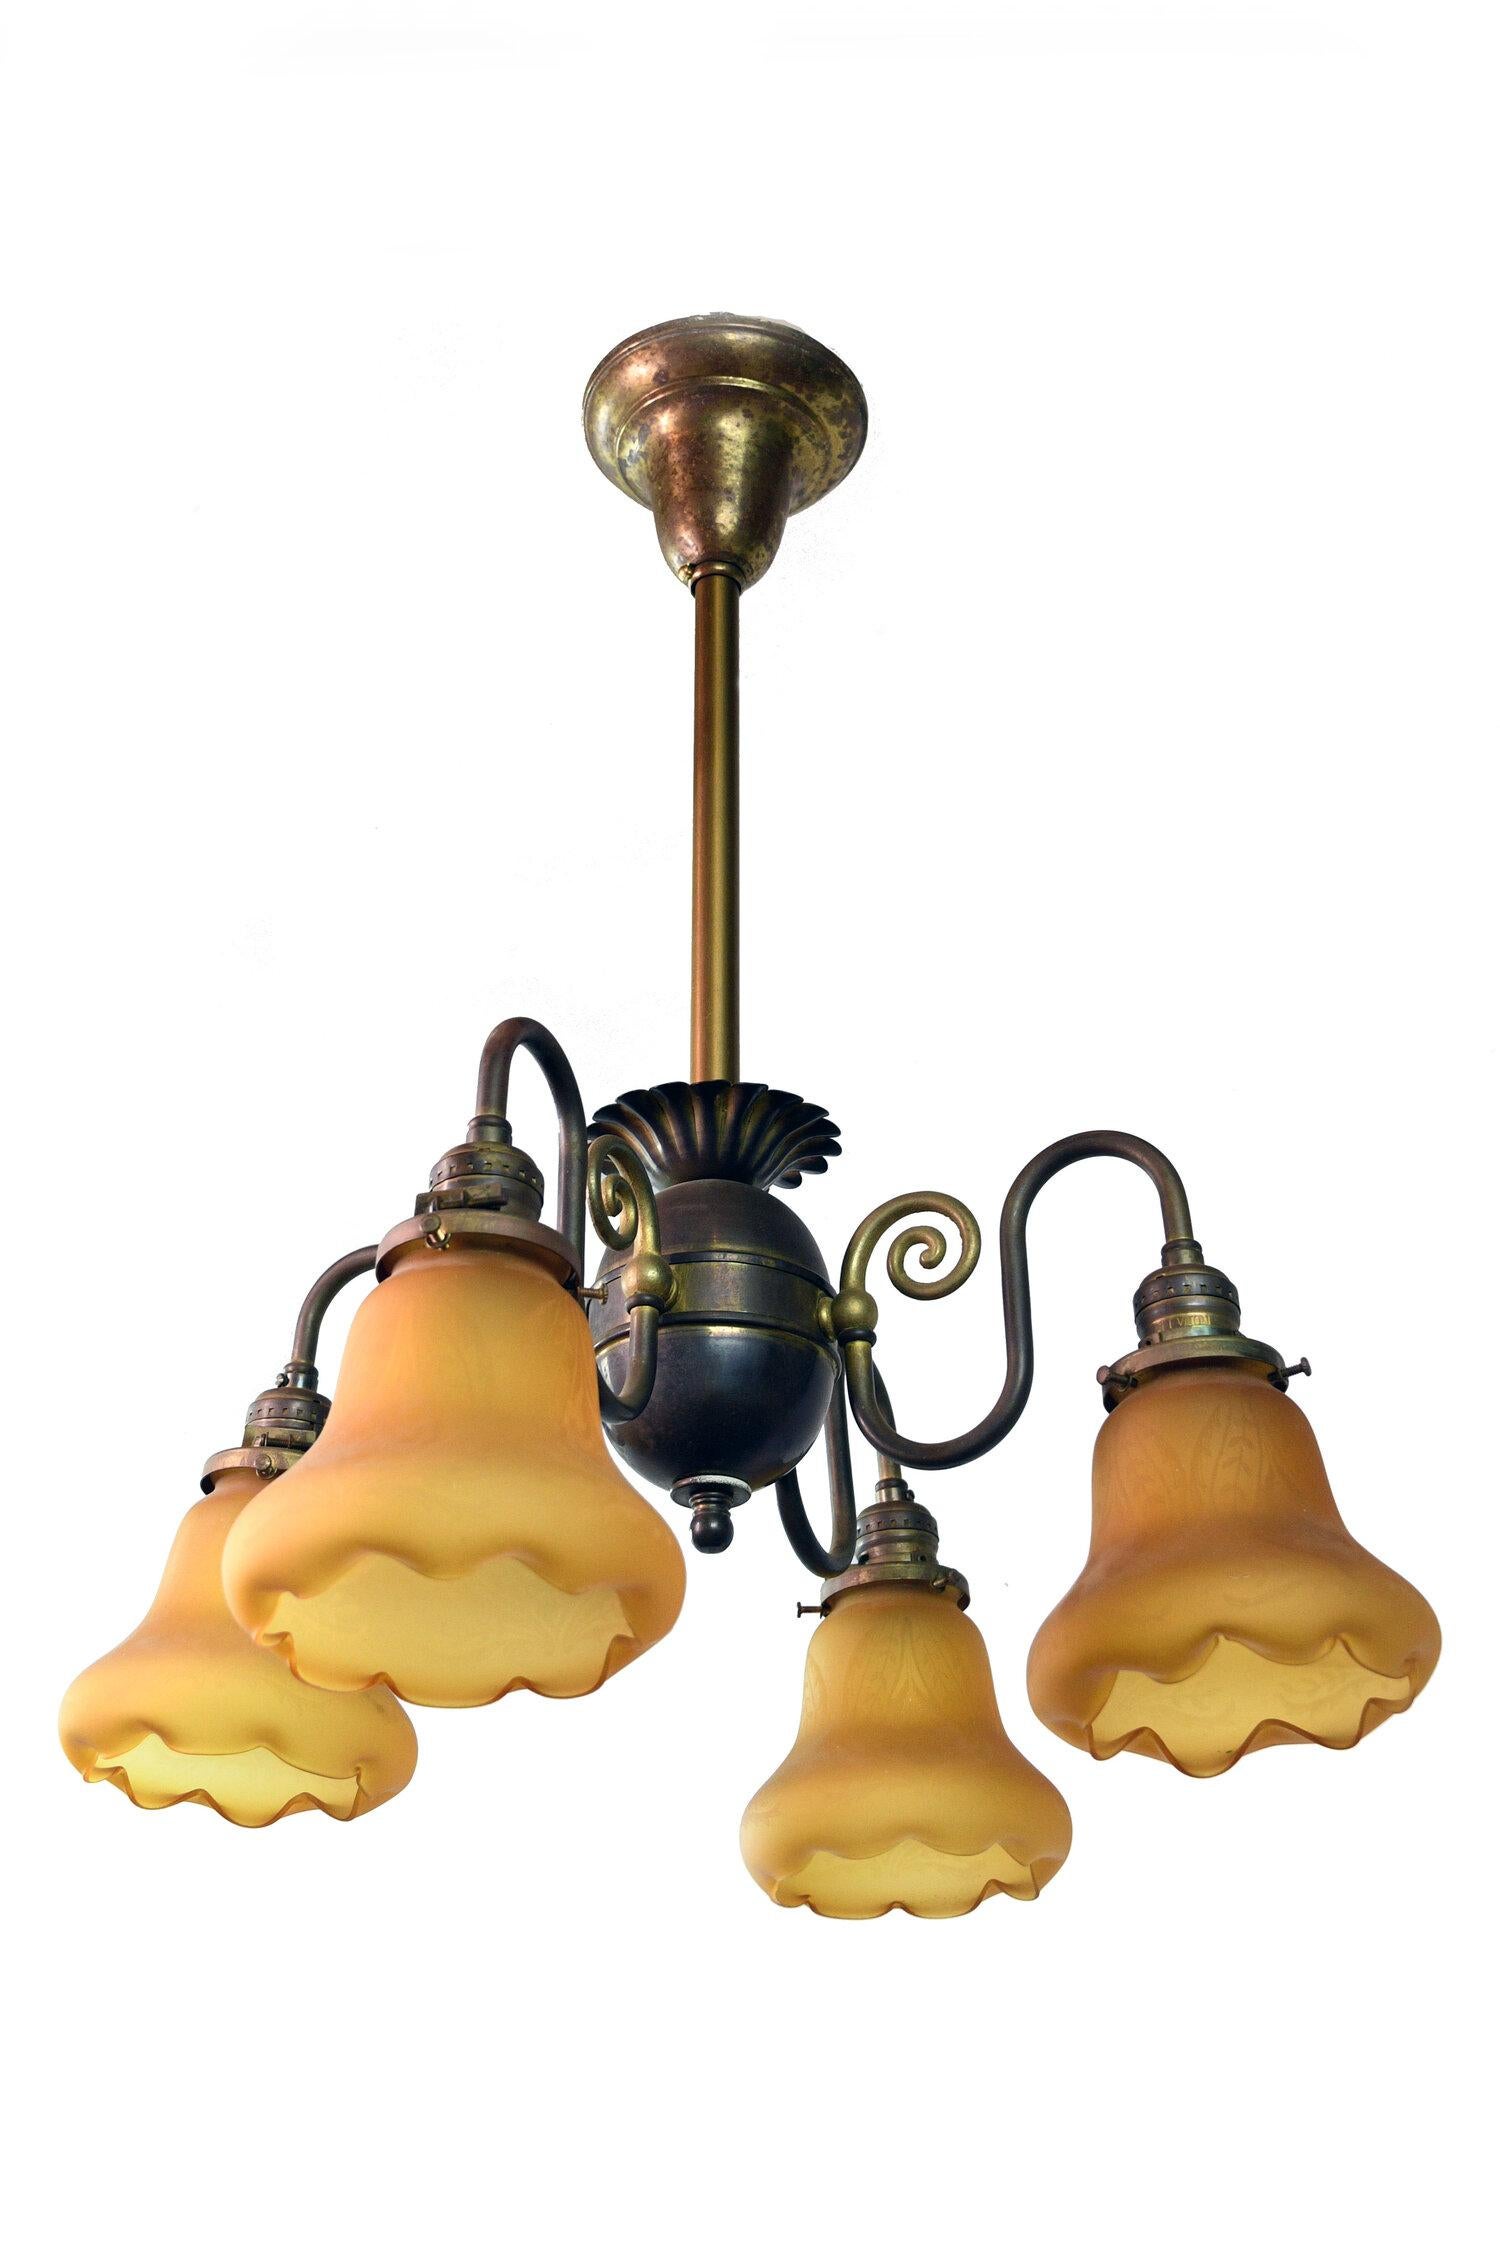 American Classical 4 Arm Swirling Brass Fixture with Scalloped Shades